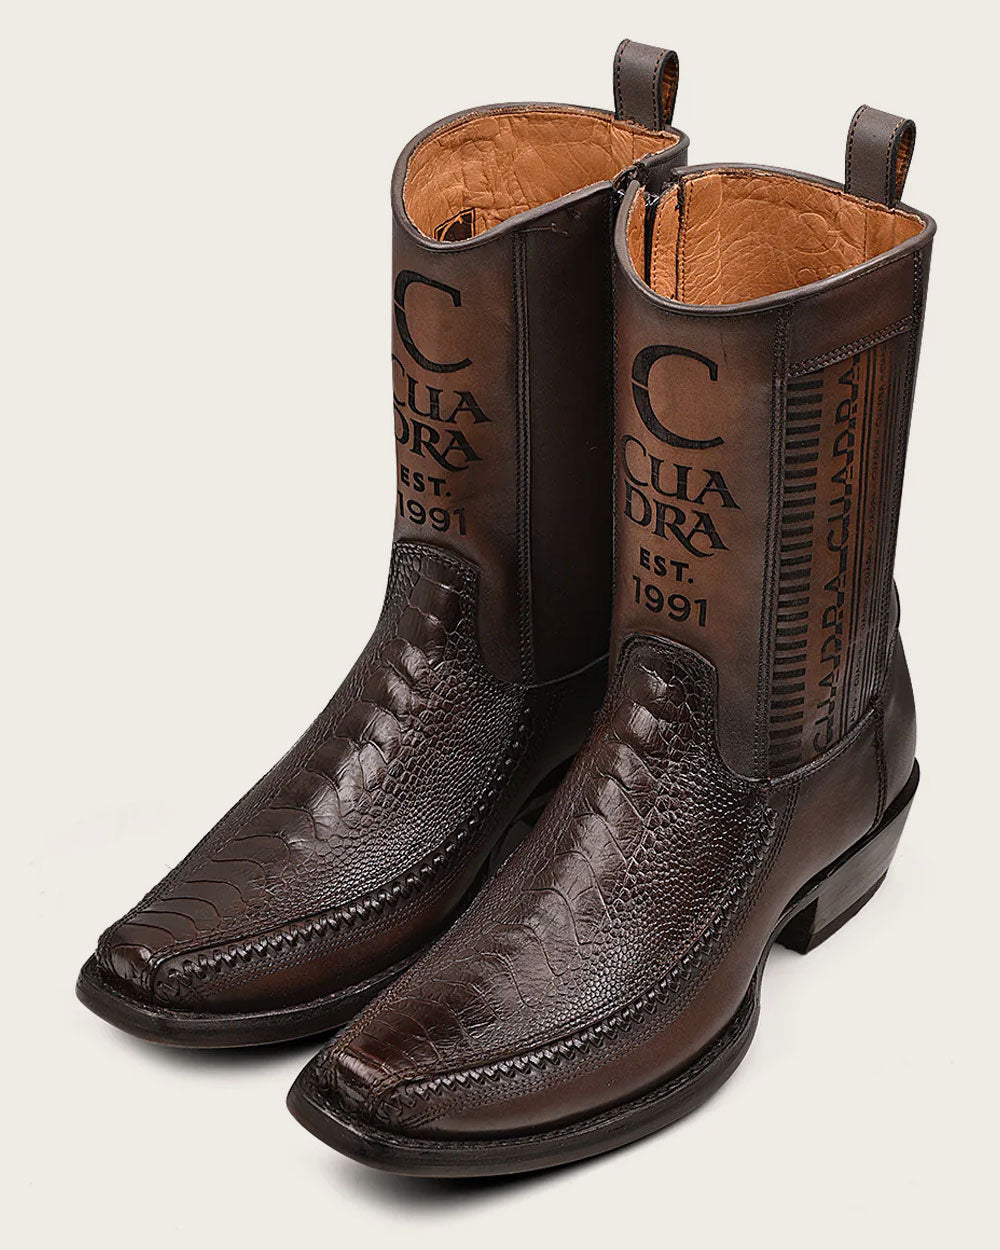 Comfort & Style: Cuadra's leather boots mold to your feet perfectly. 